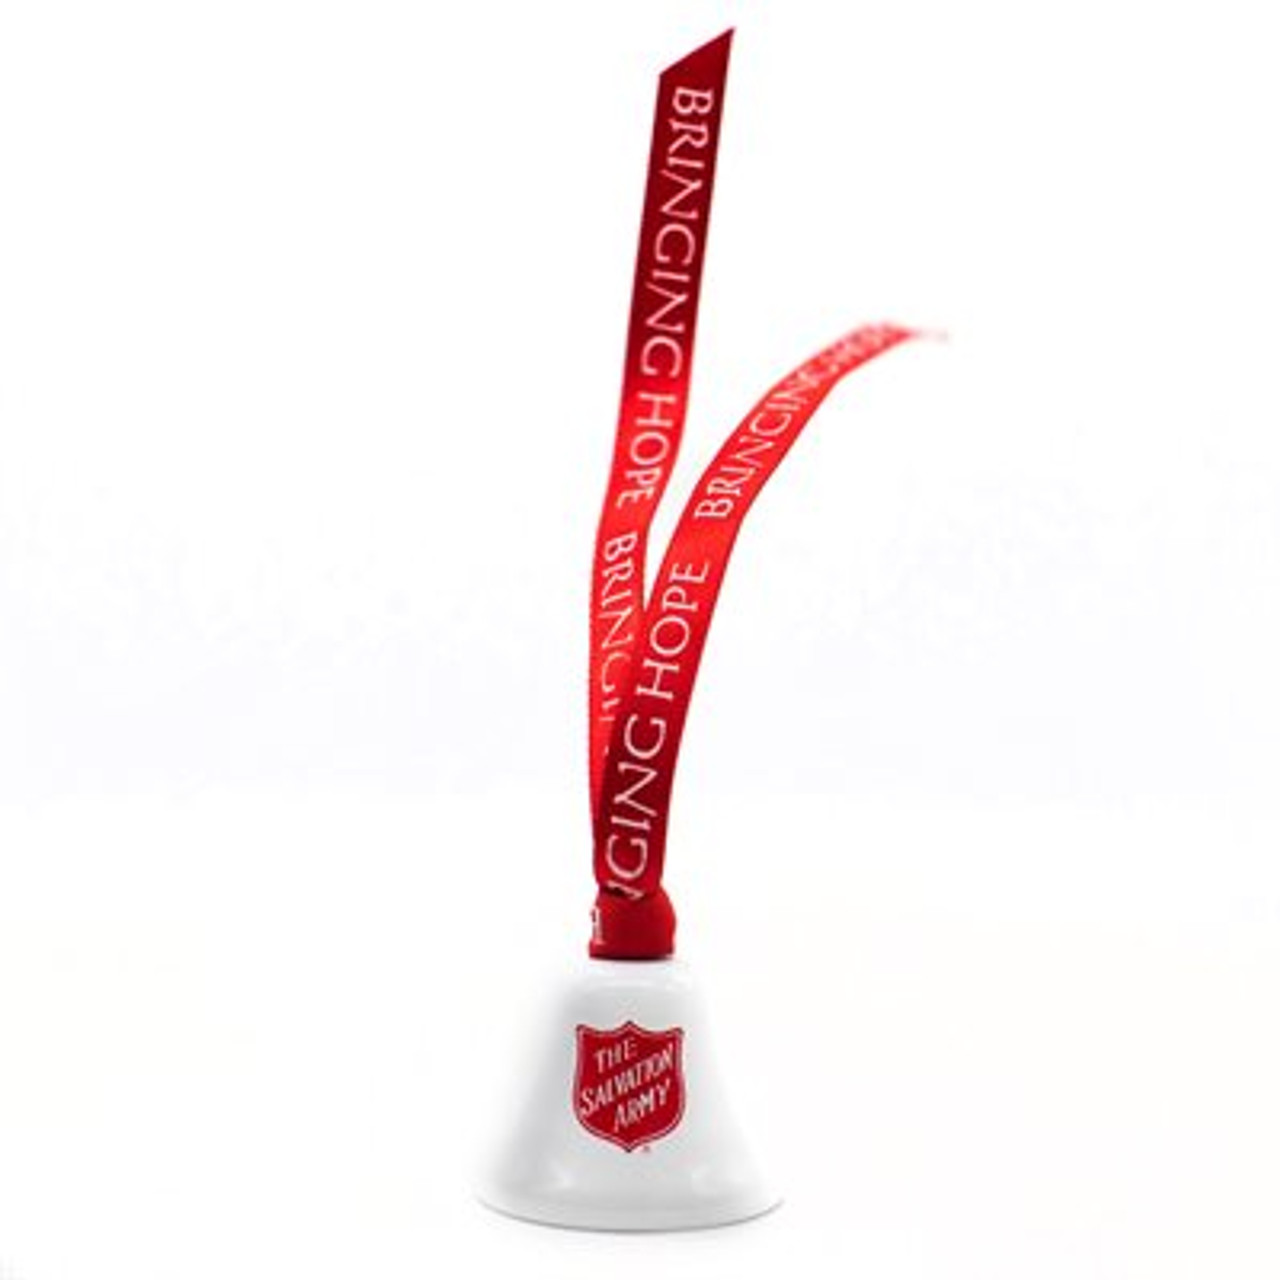 Bell ornament ribbon Bringing Hope while supplies last - The Salvation Army  Trade Central